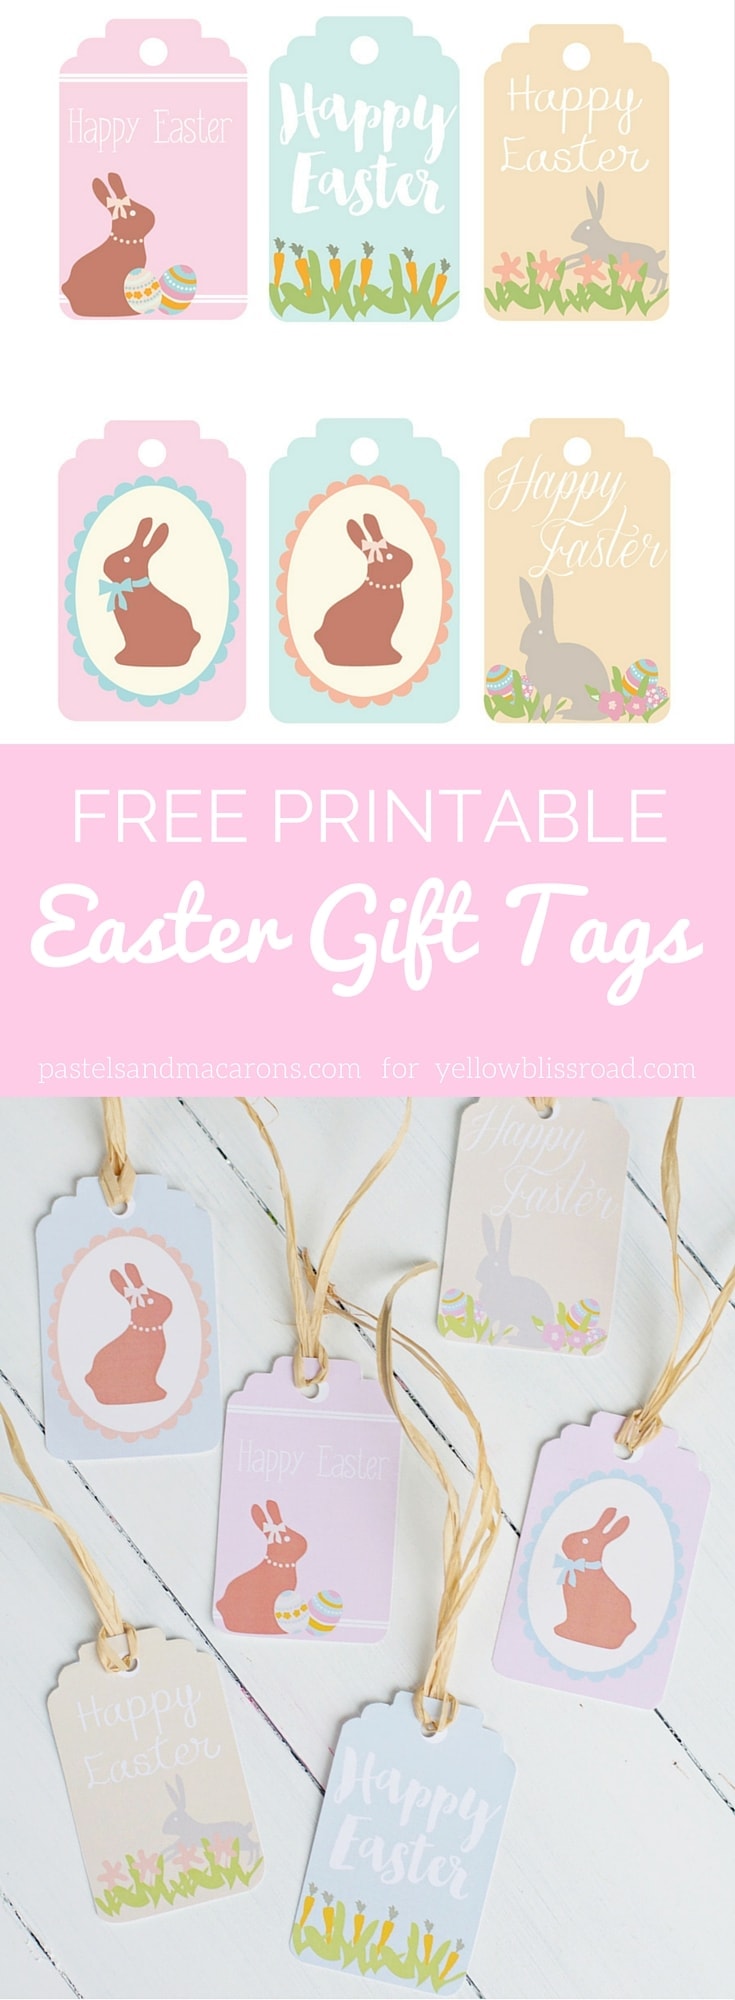 Download these Free Printable Easter Gift Tags for all your gifts this Easter. You get a sex of 6 pastel colored tags!